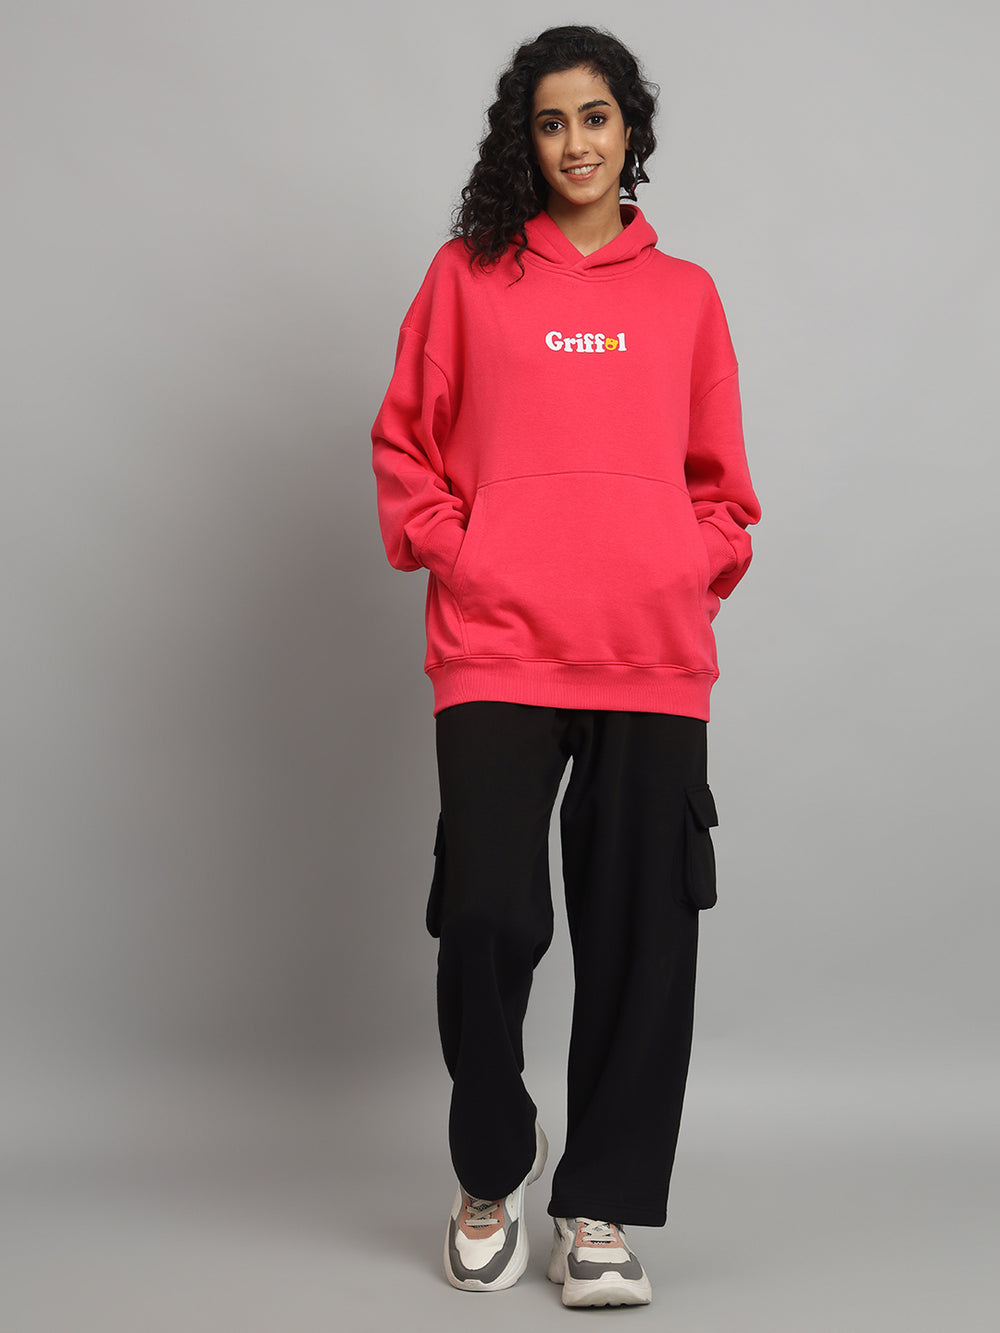 Griffel Women Oversized Fit HOW DO I Print 100% Cotton Neon Pink Fleece Hoodie and trackpant - griffel